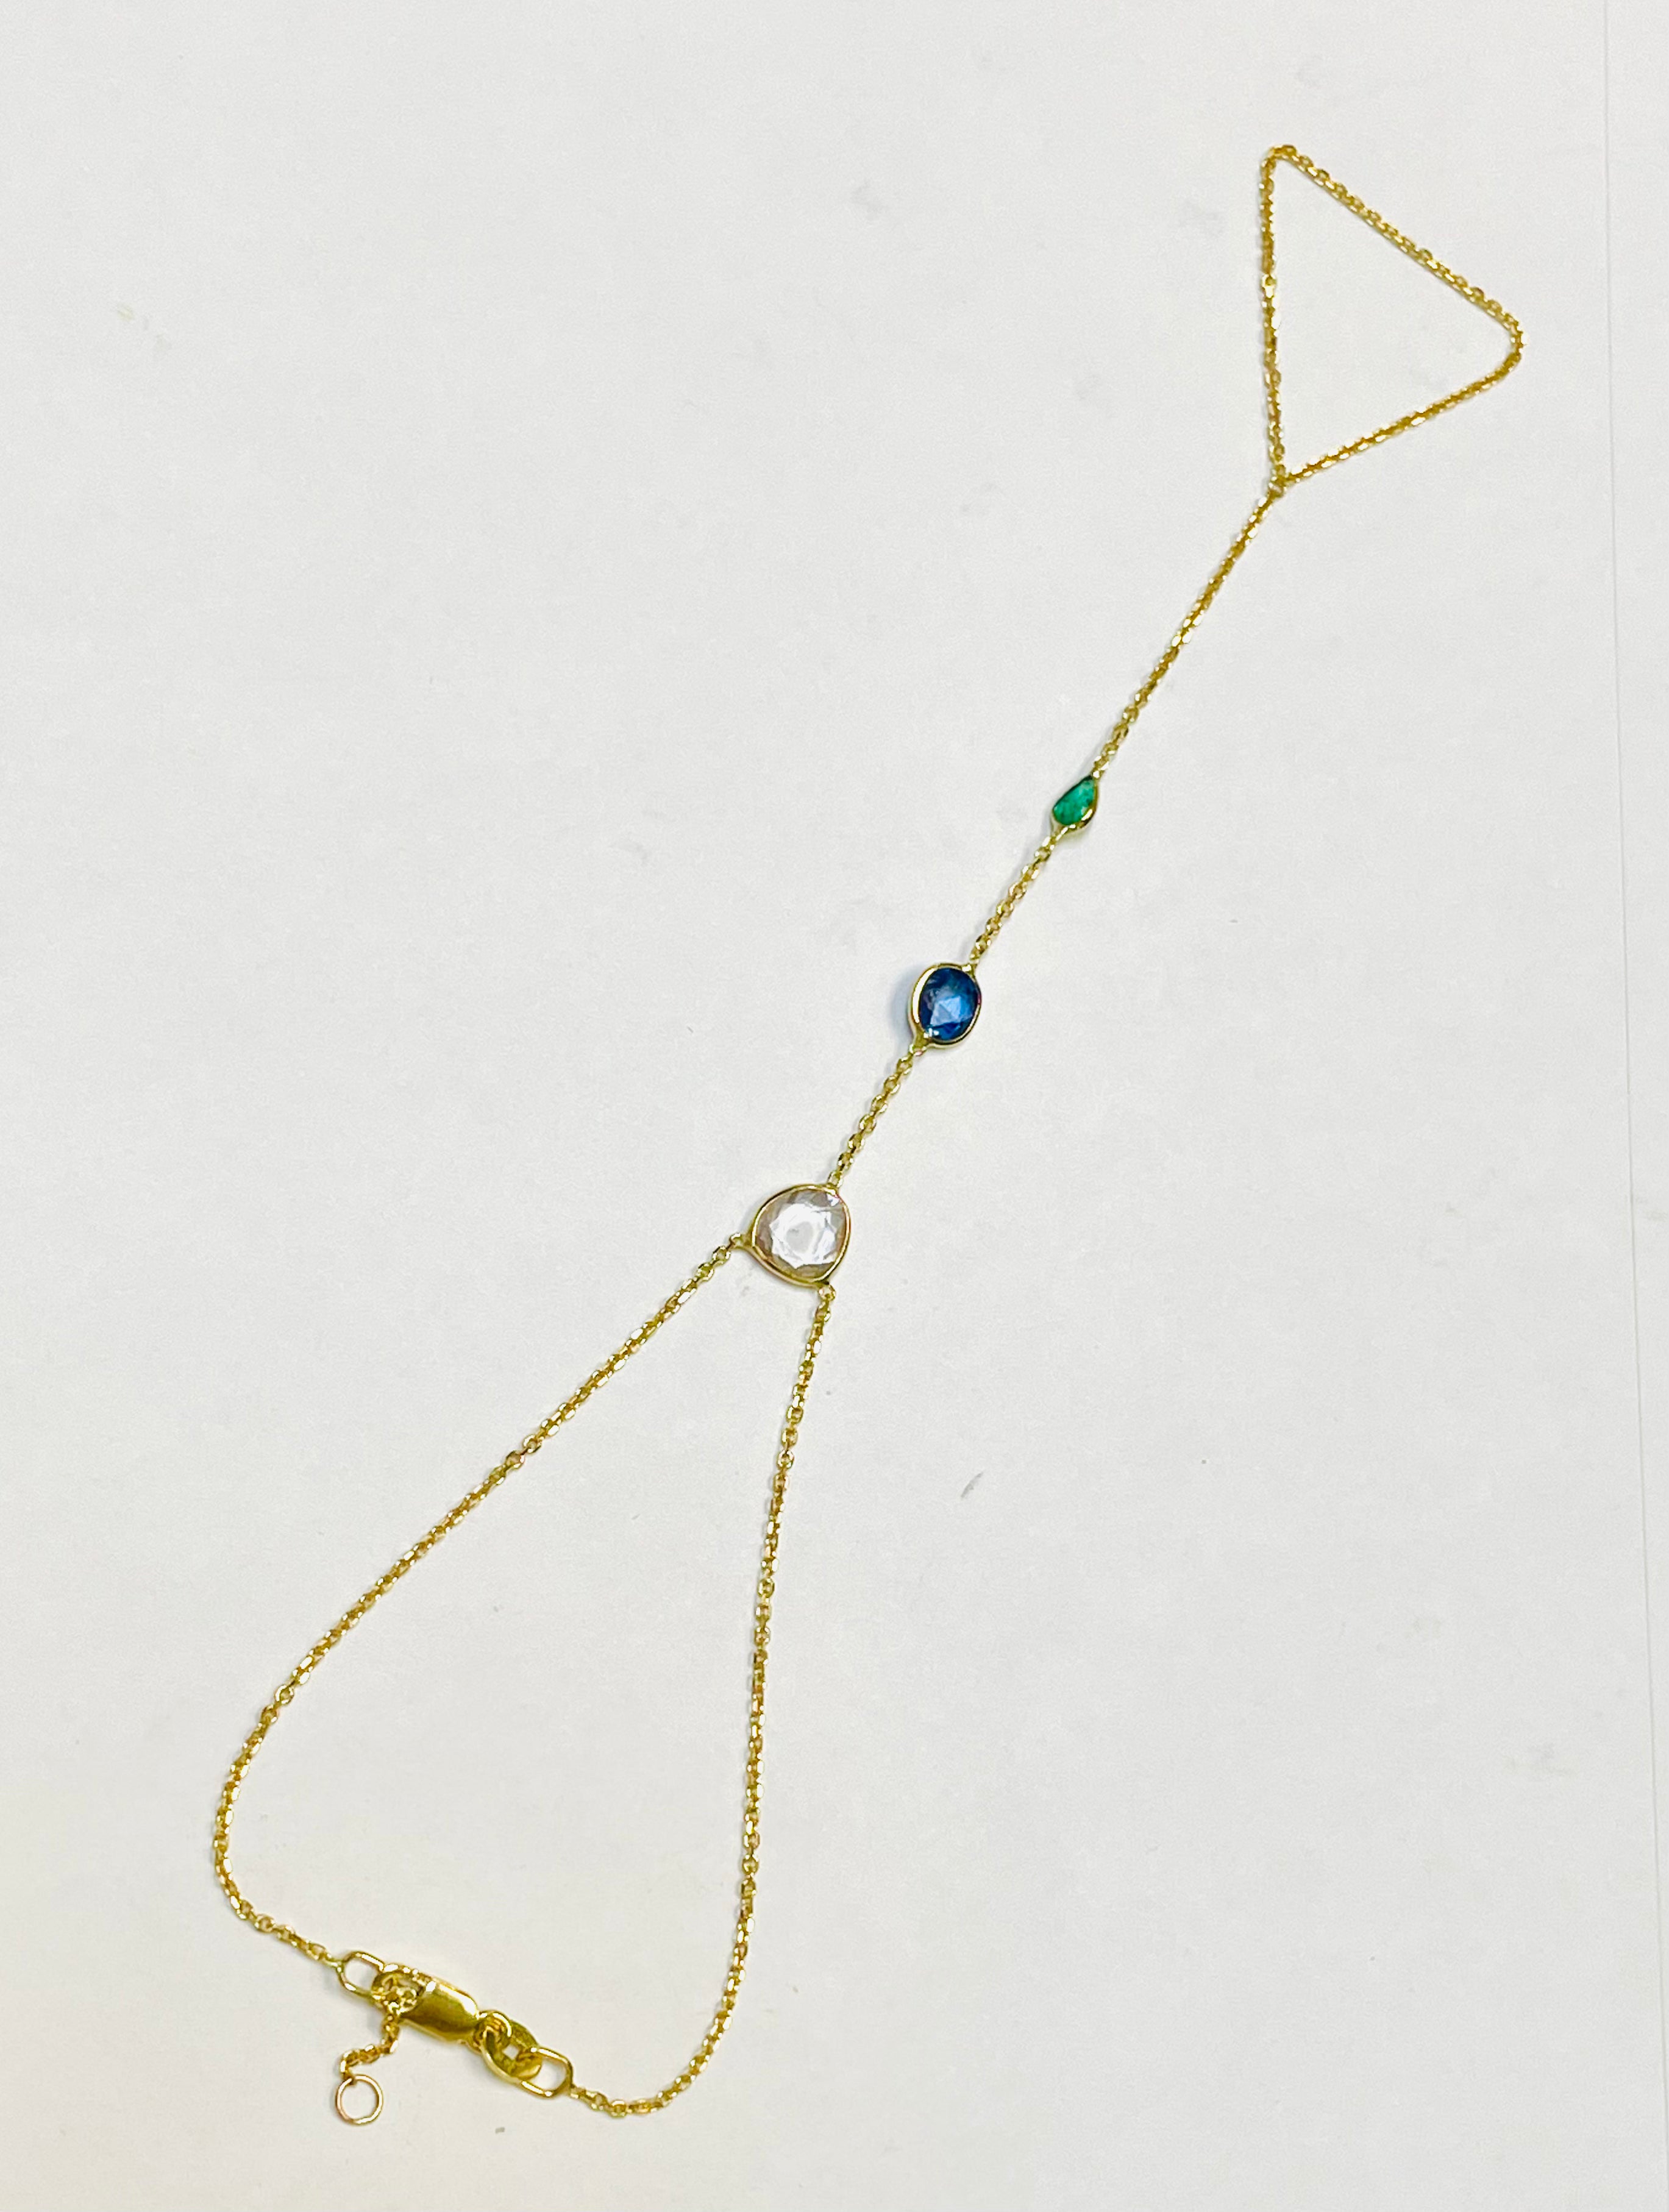 Rose Cut Sapphire, Blue Sapphire and Emerald Hand Chain Solid 14k Yellow Gold